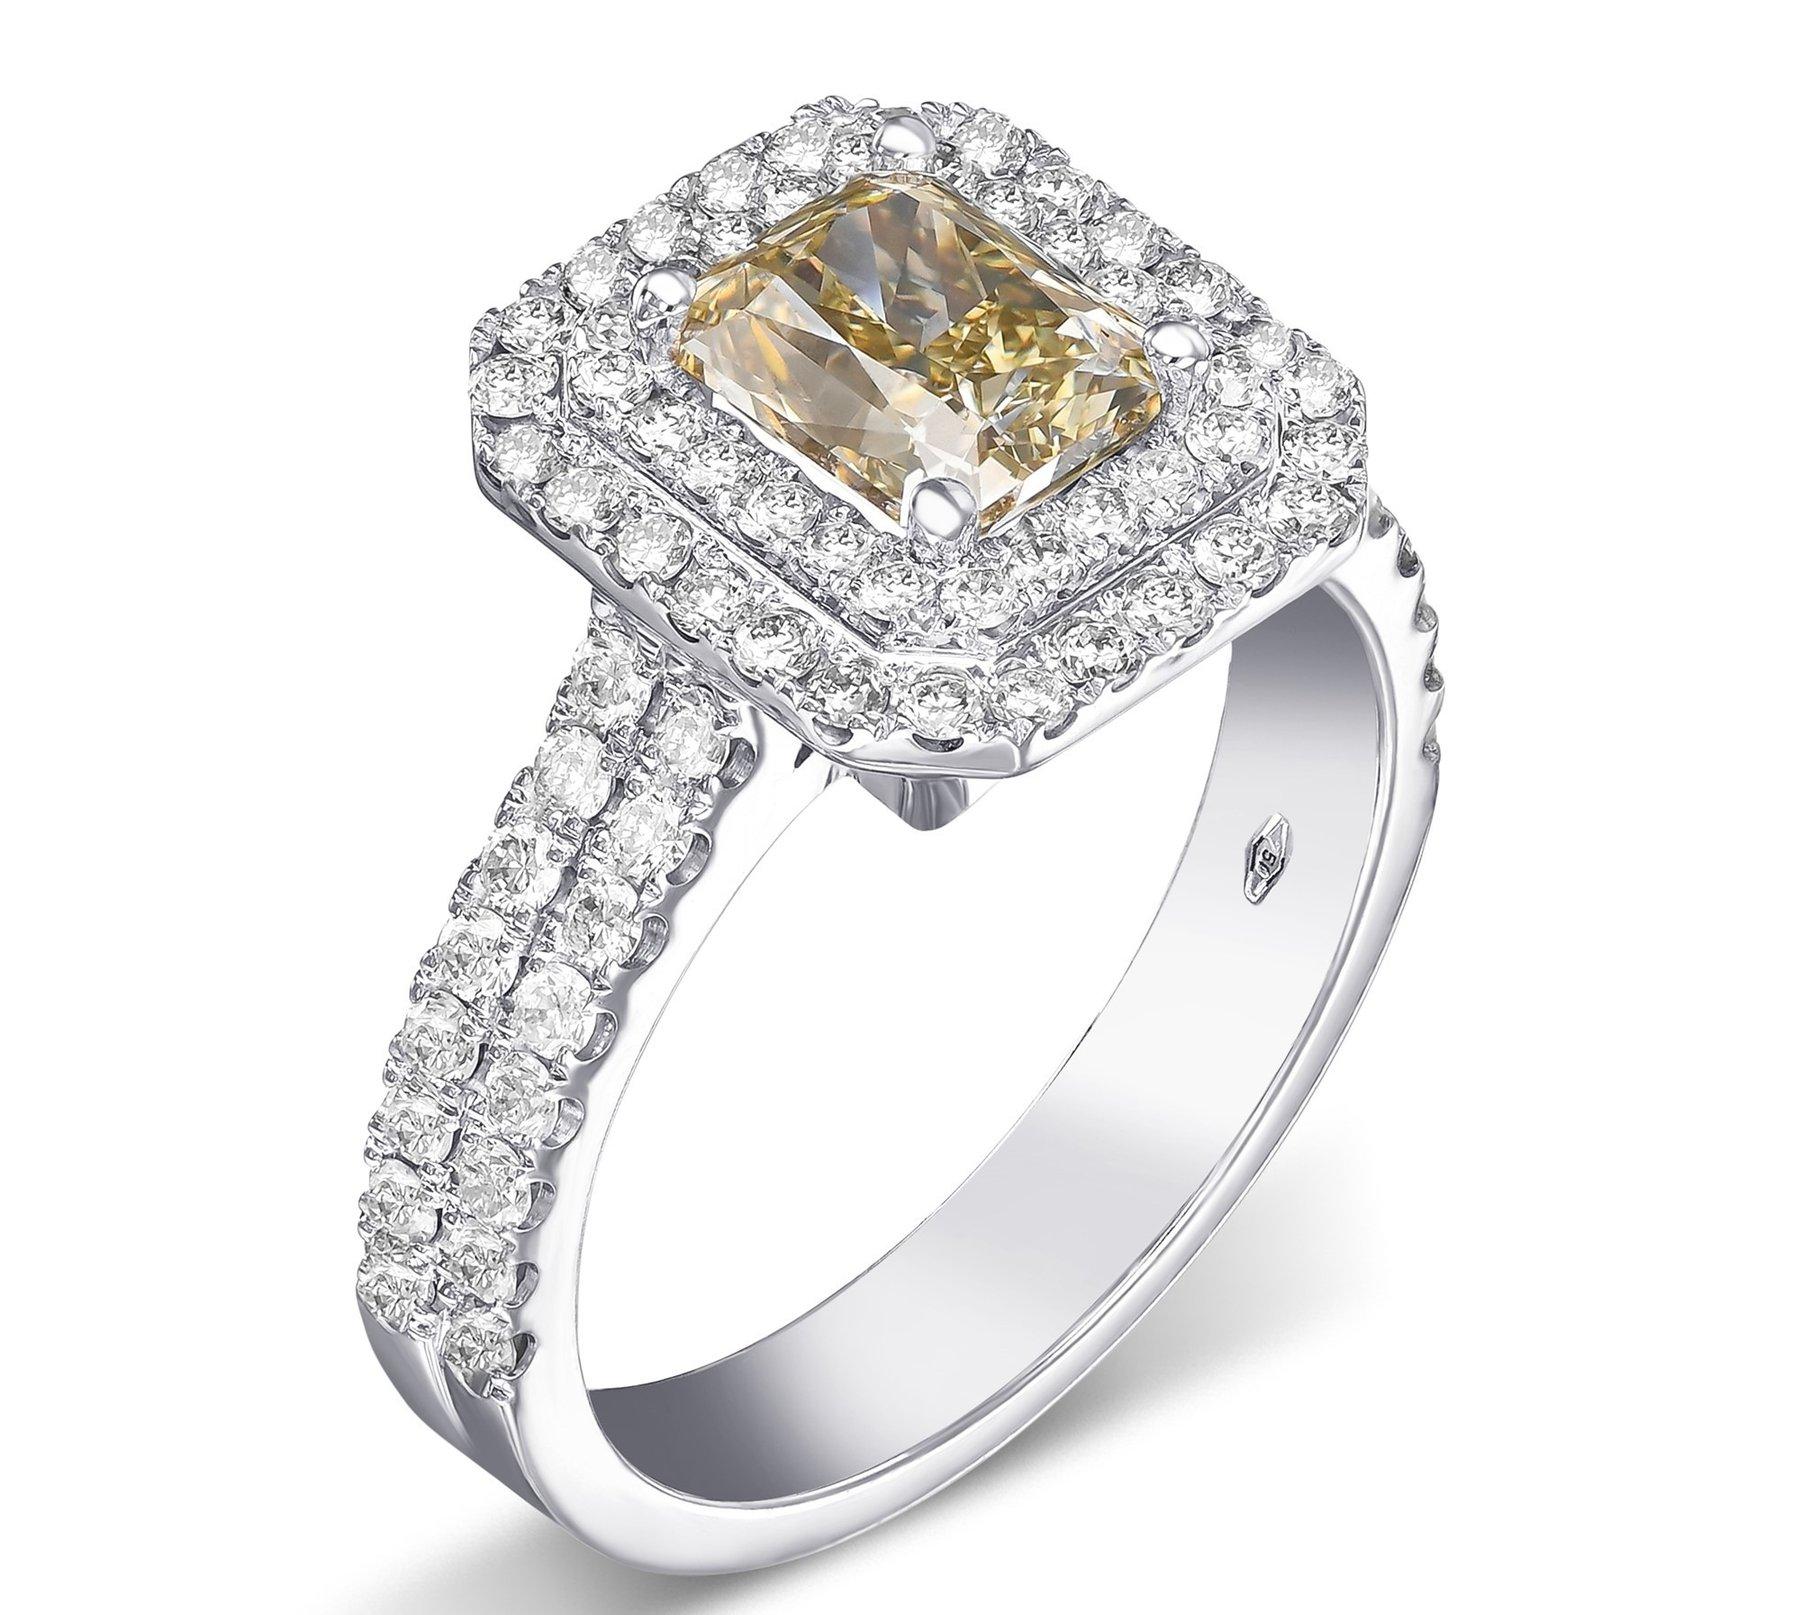 Today we are offering this amazing ring featuring a center 1.50 carat fancy brownish yellow diamond and 0.50 cttw diamonds halo ring. 
18 kt. White gold
Size: 56 EU / 7.75 US
Total weight: 7.28 g

Ring can be resized free of charge prior to shipping